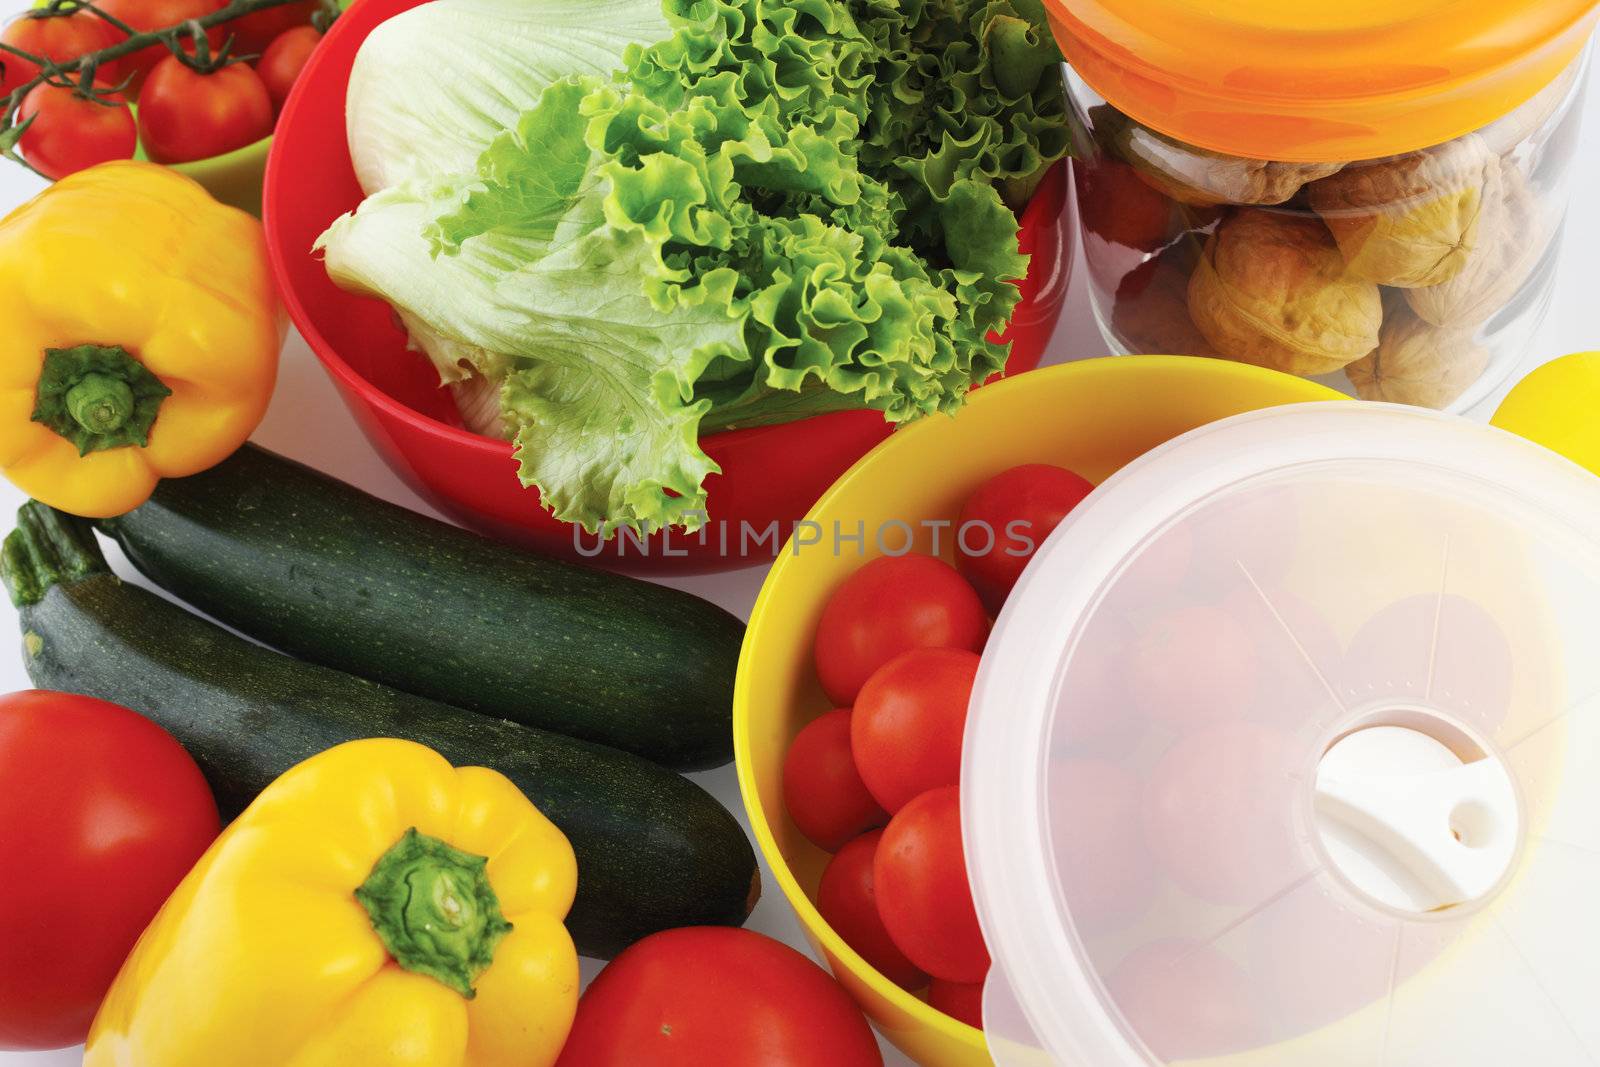 plastic containers for storing food in the fridge